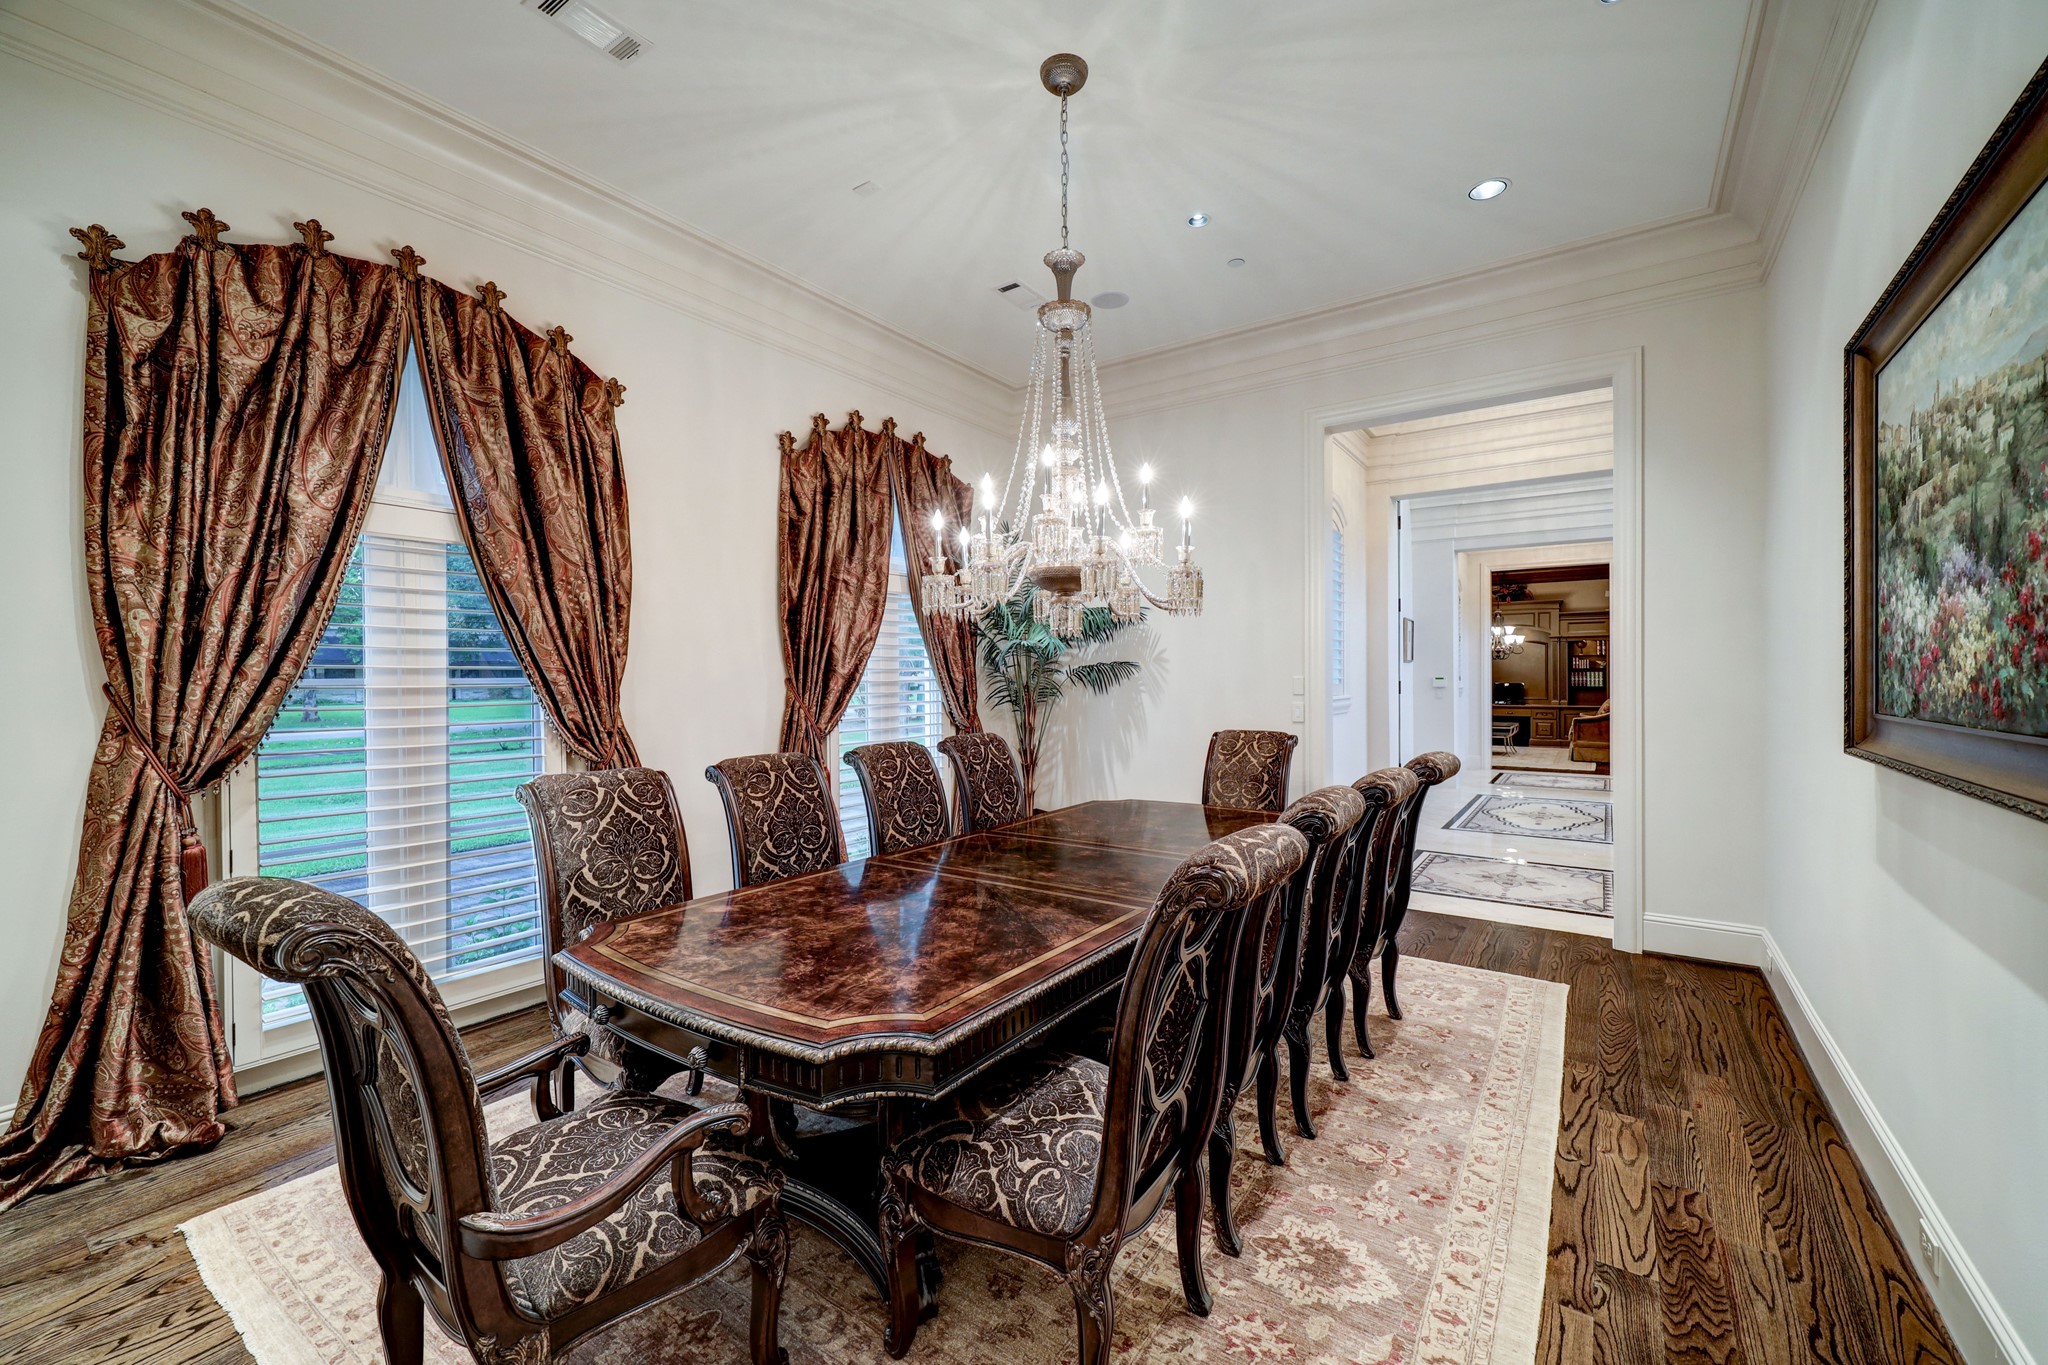 The Formal Dining Room is located just off the Entry and features hardwood floors, a hanging chandelier, crown molding and baseboards and access to the Kitchen via the Butler's Pantry.